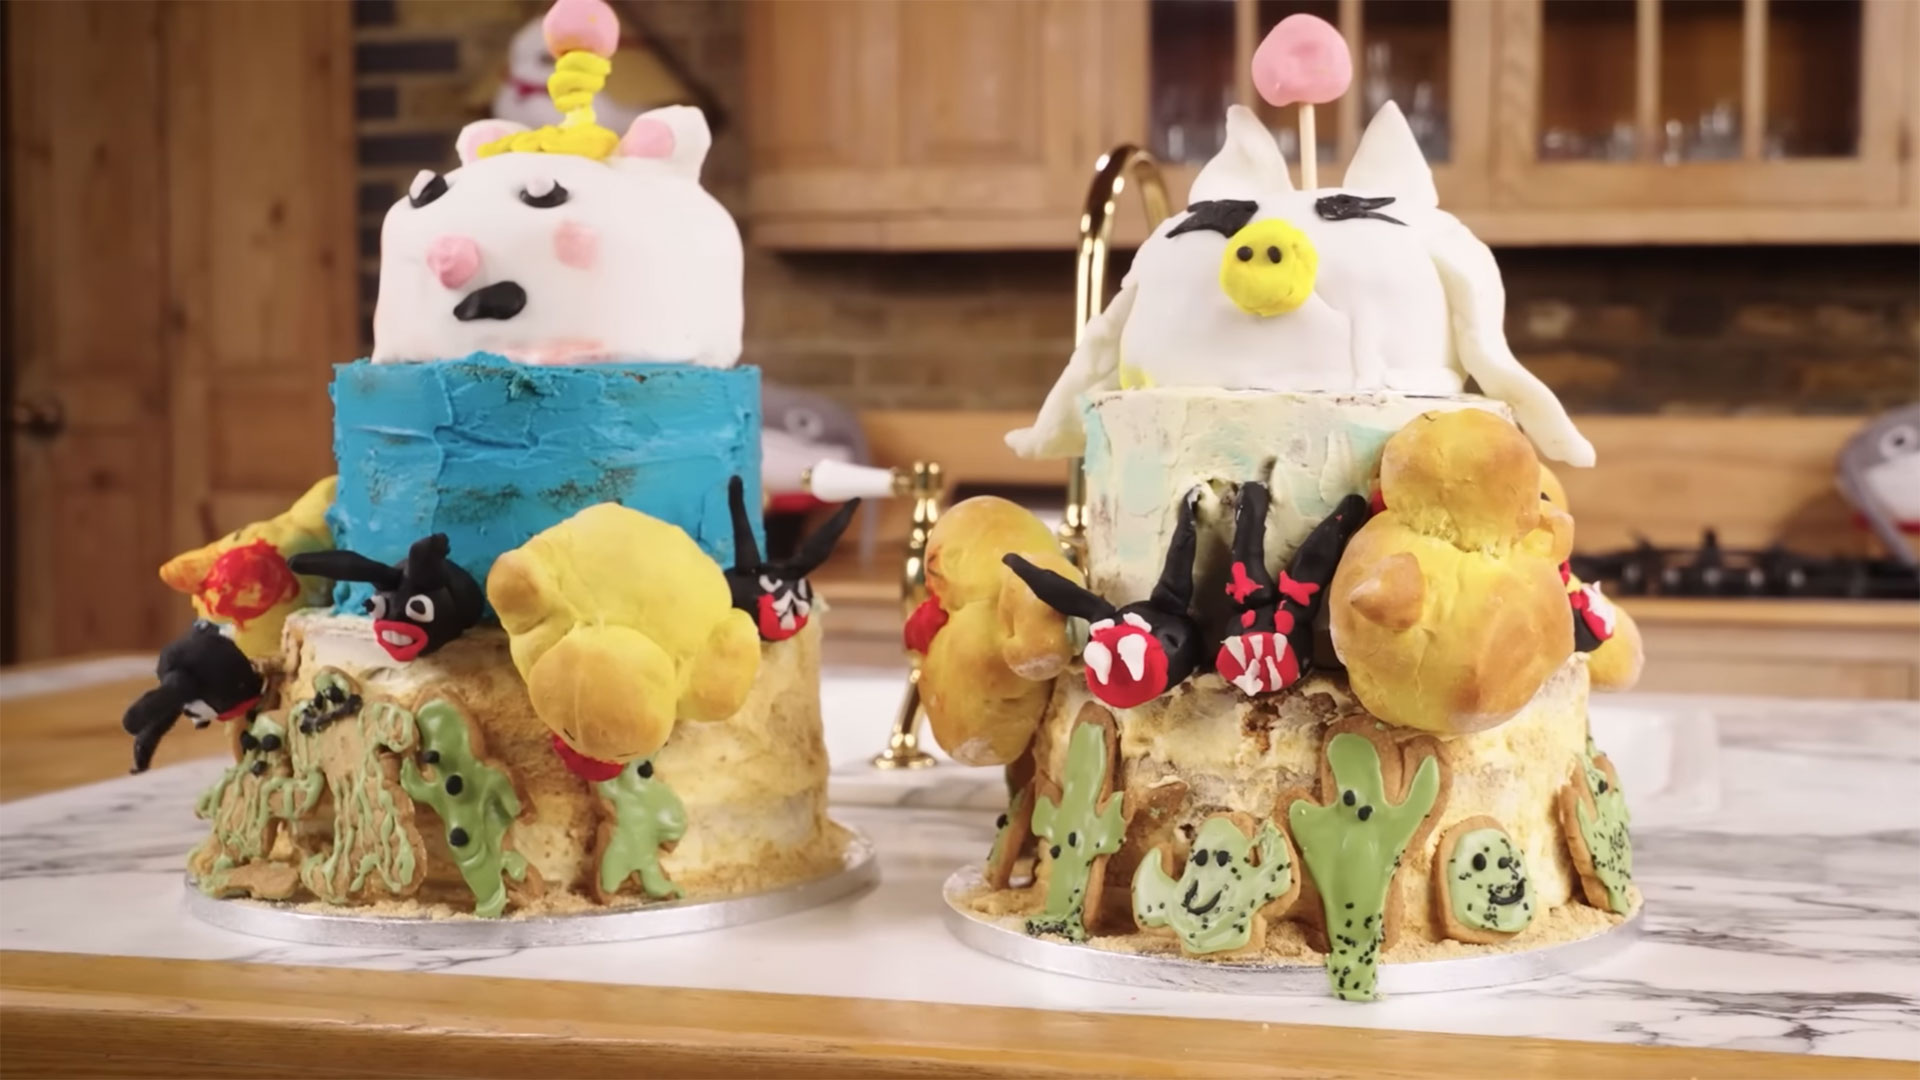 The voice actors for Estinien, Thancred, Alisaie, and Alphinaud tried to recreate the 8th Birthday Cake made by Bake-off star Kim-Joy